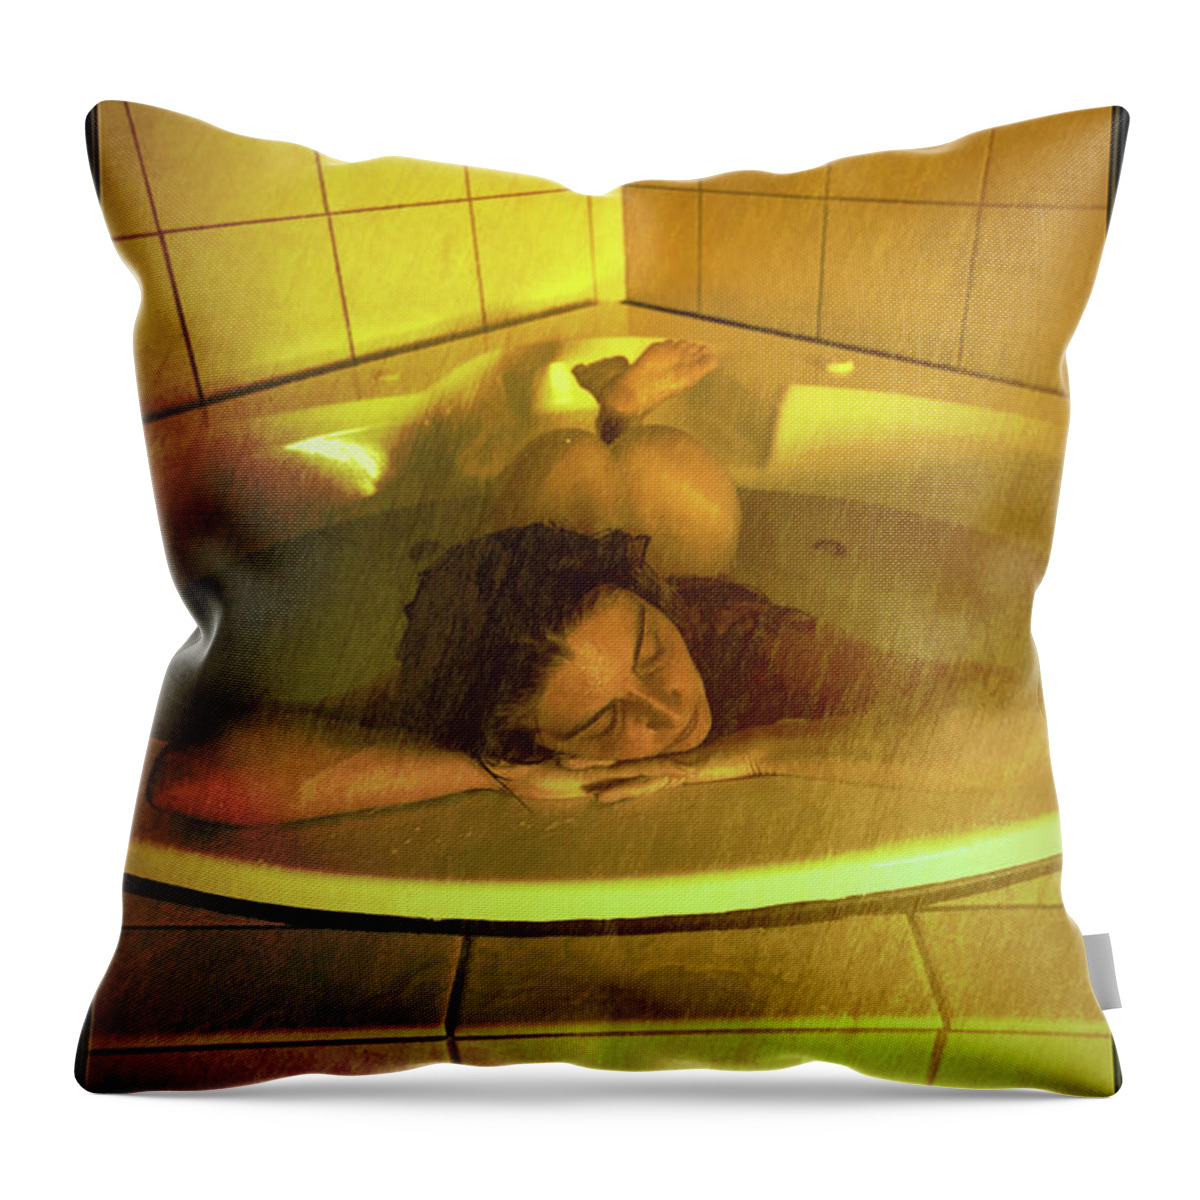 Dark Throw Pillow featuring the digital art Bathed In Golden Light by Recreating Creation